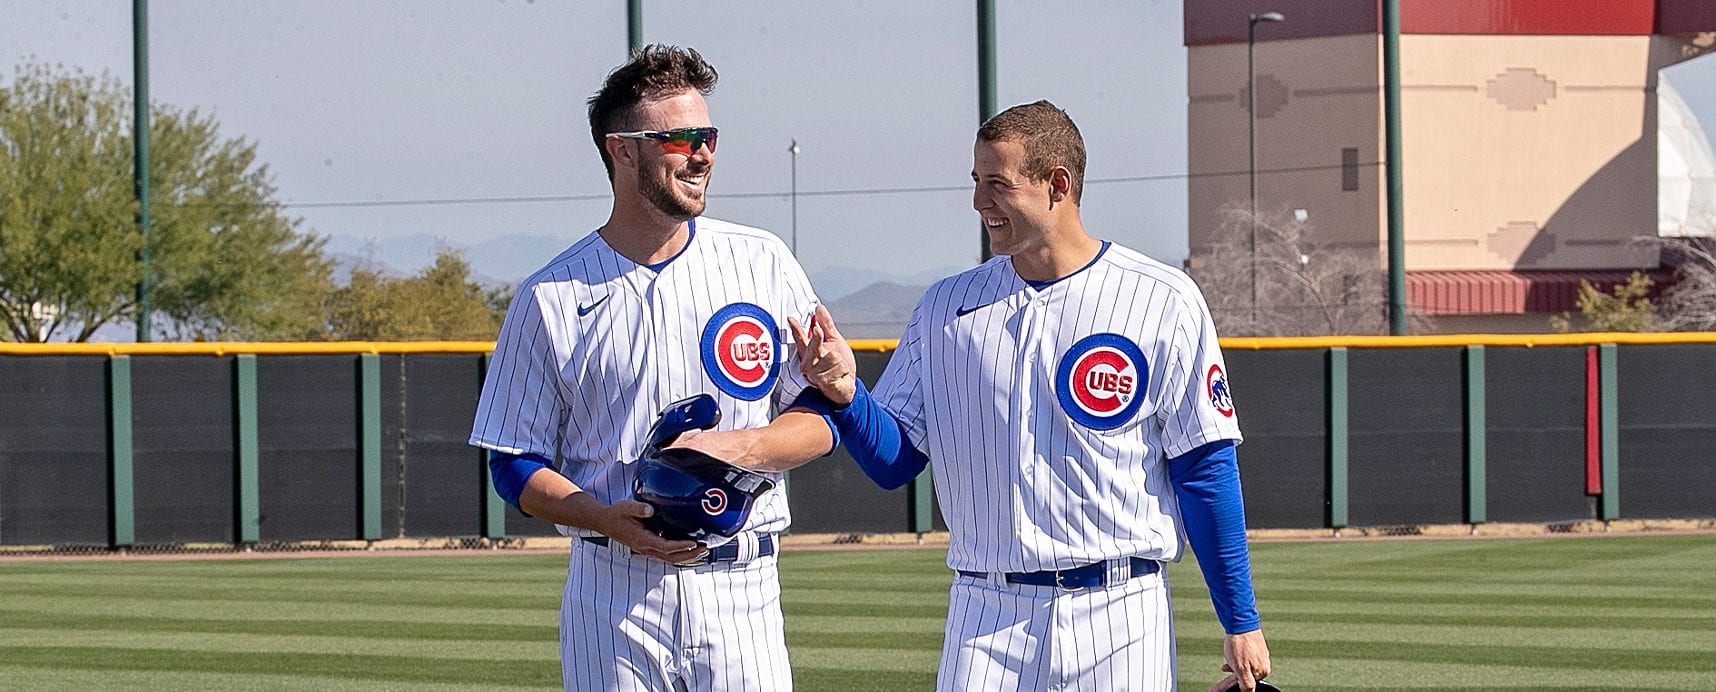 Cubs Spring Training Notebook: Swanson's winning mentality, Lester's mark  on Steele, Cubs make some spring history - Marquee Sports Network